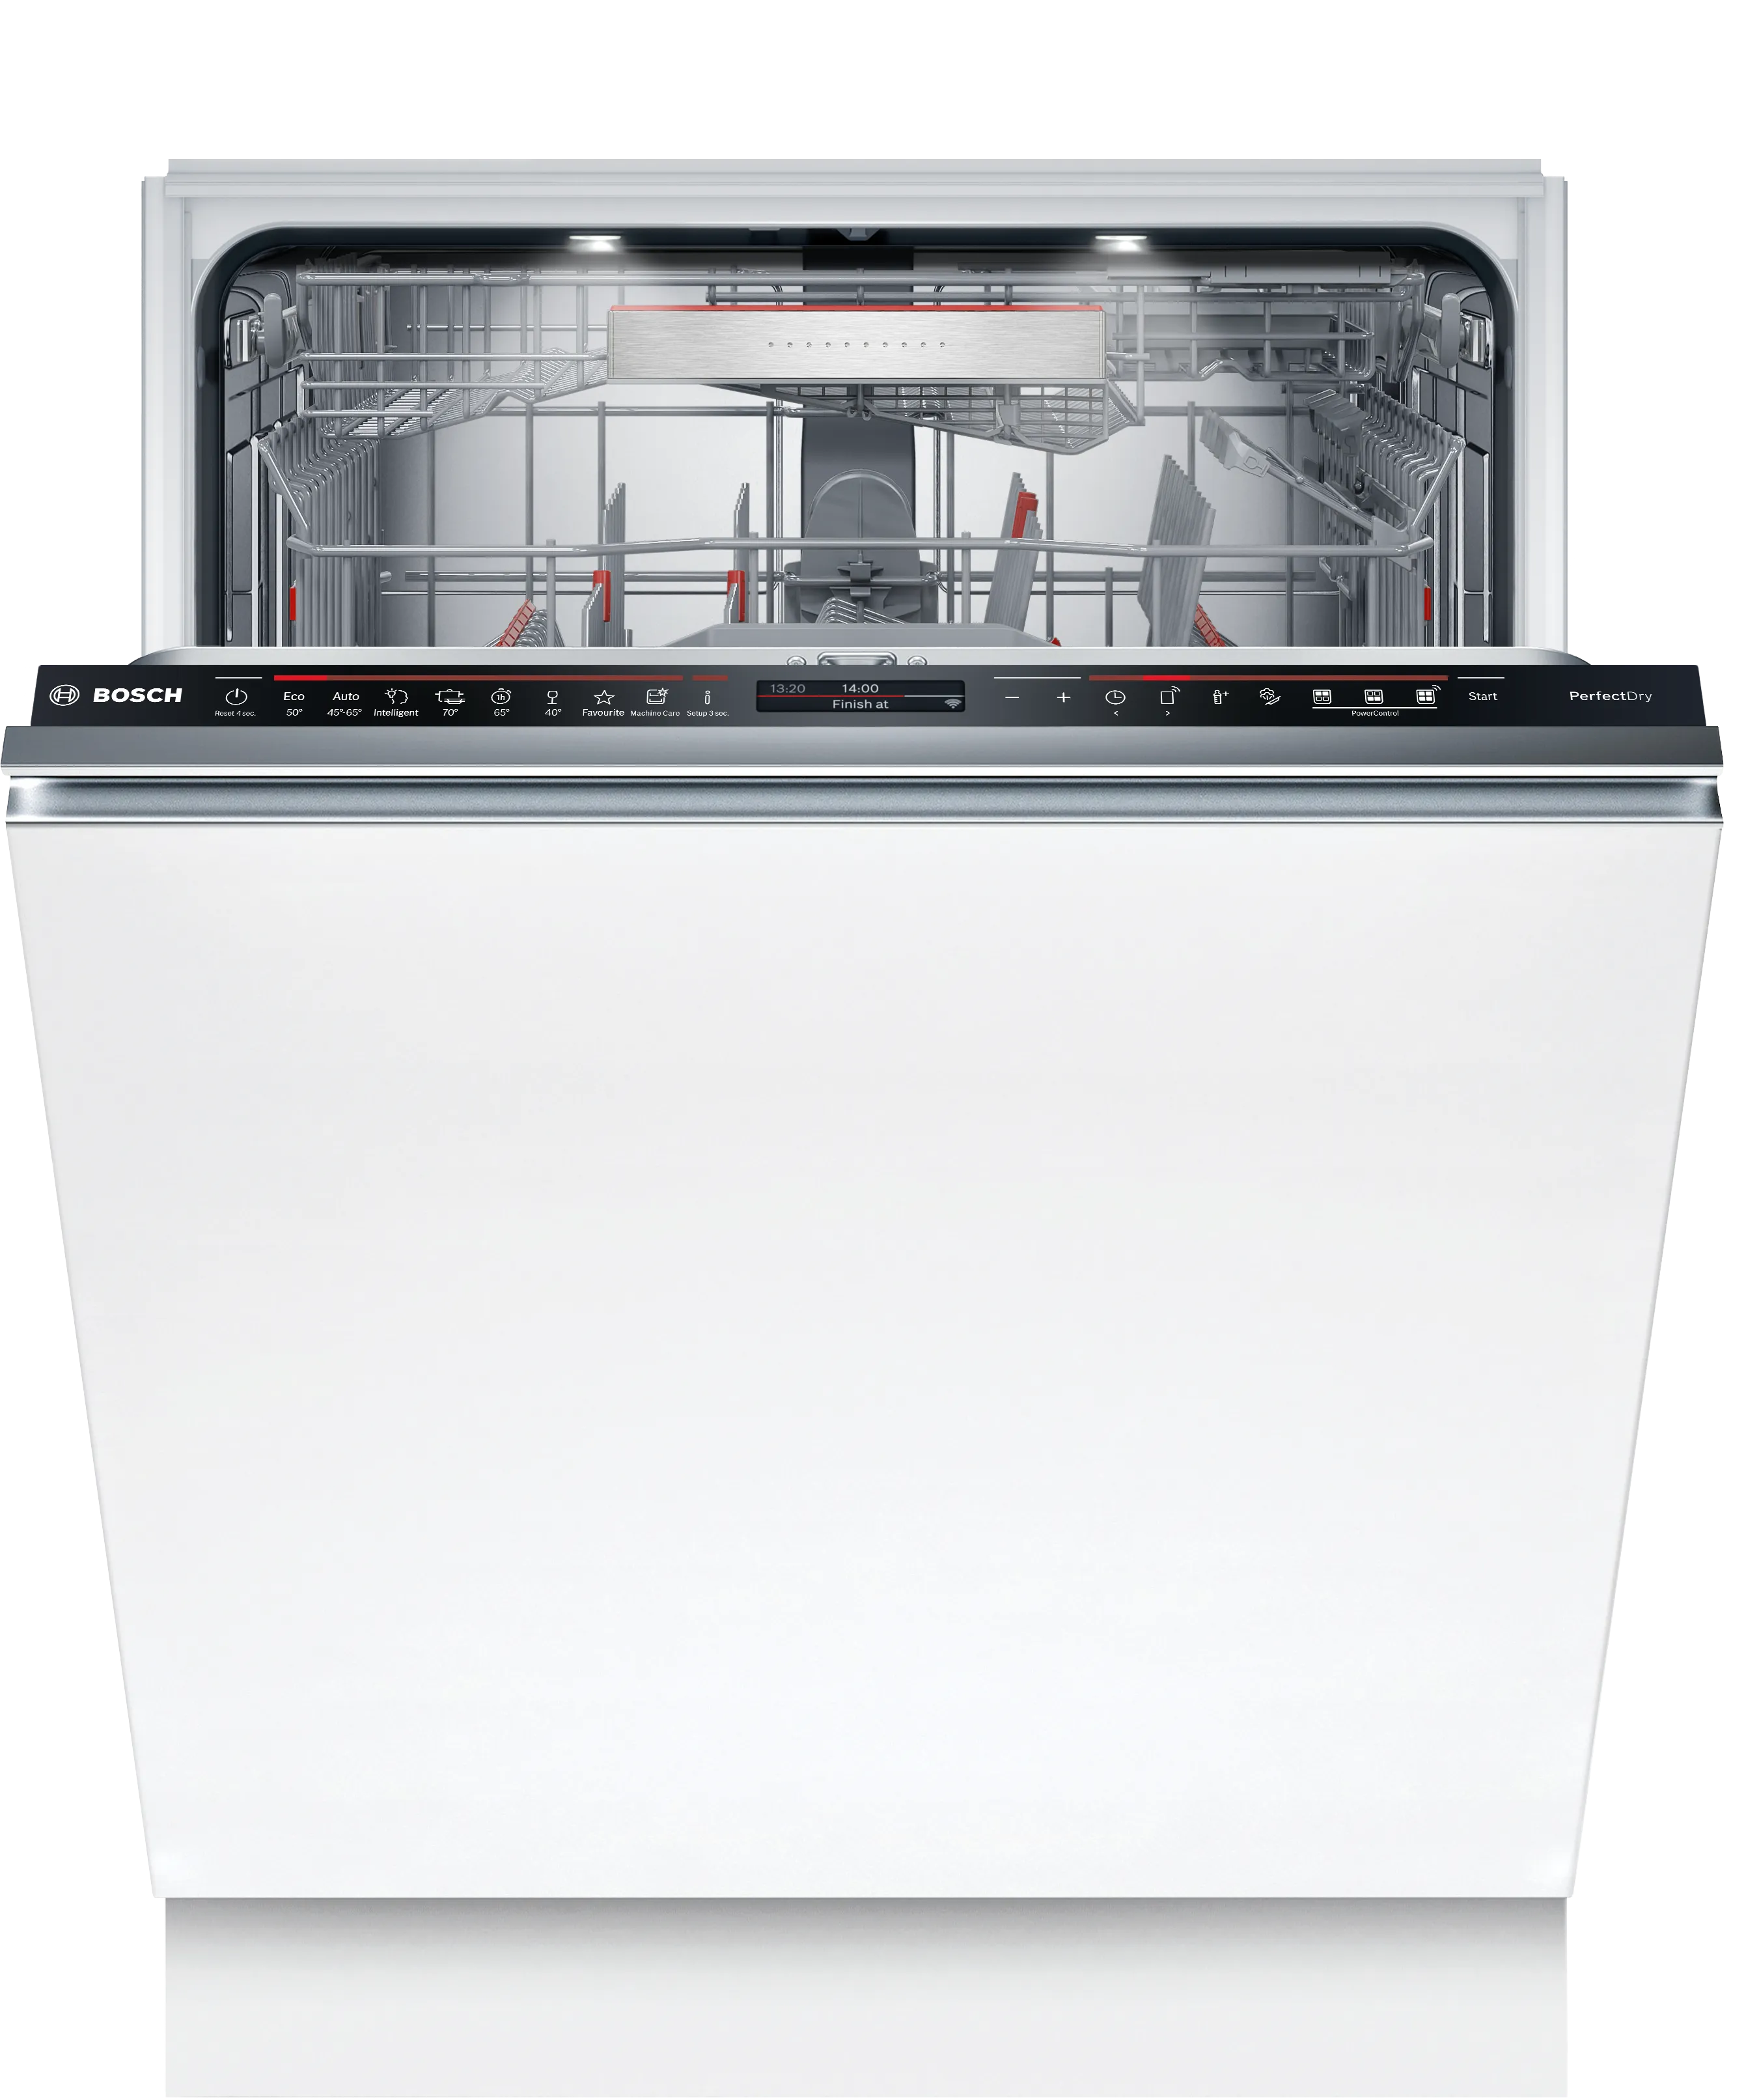 Series 8 fully-integrated dishwasher 60 cm 